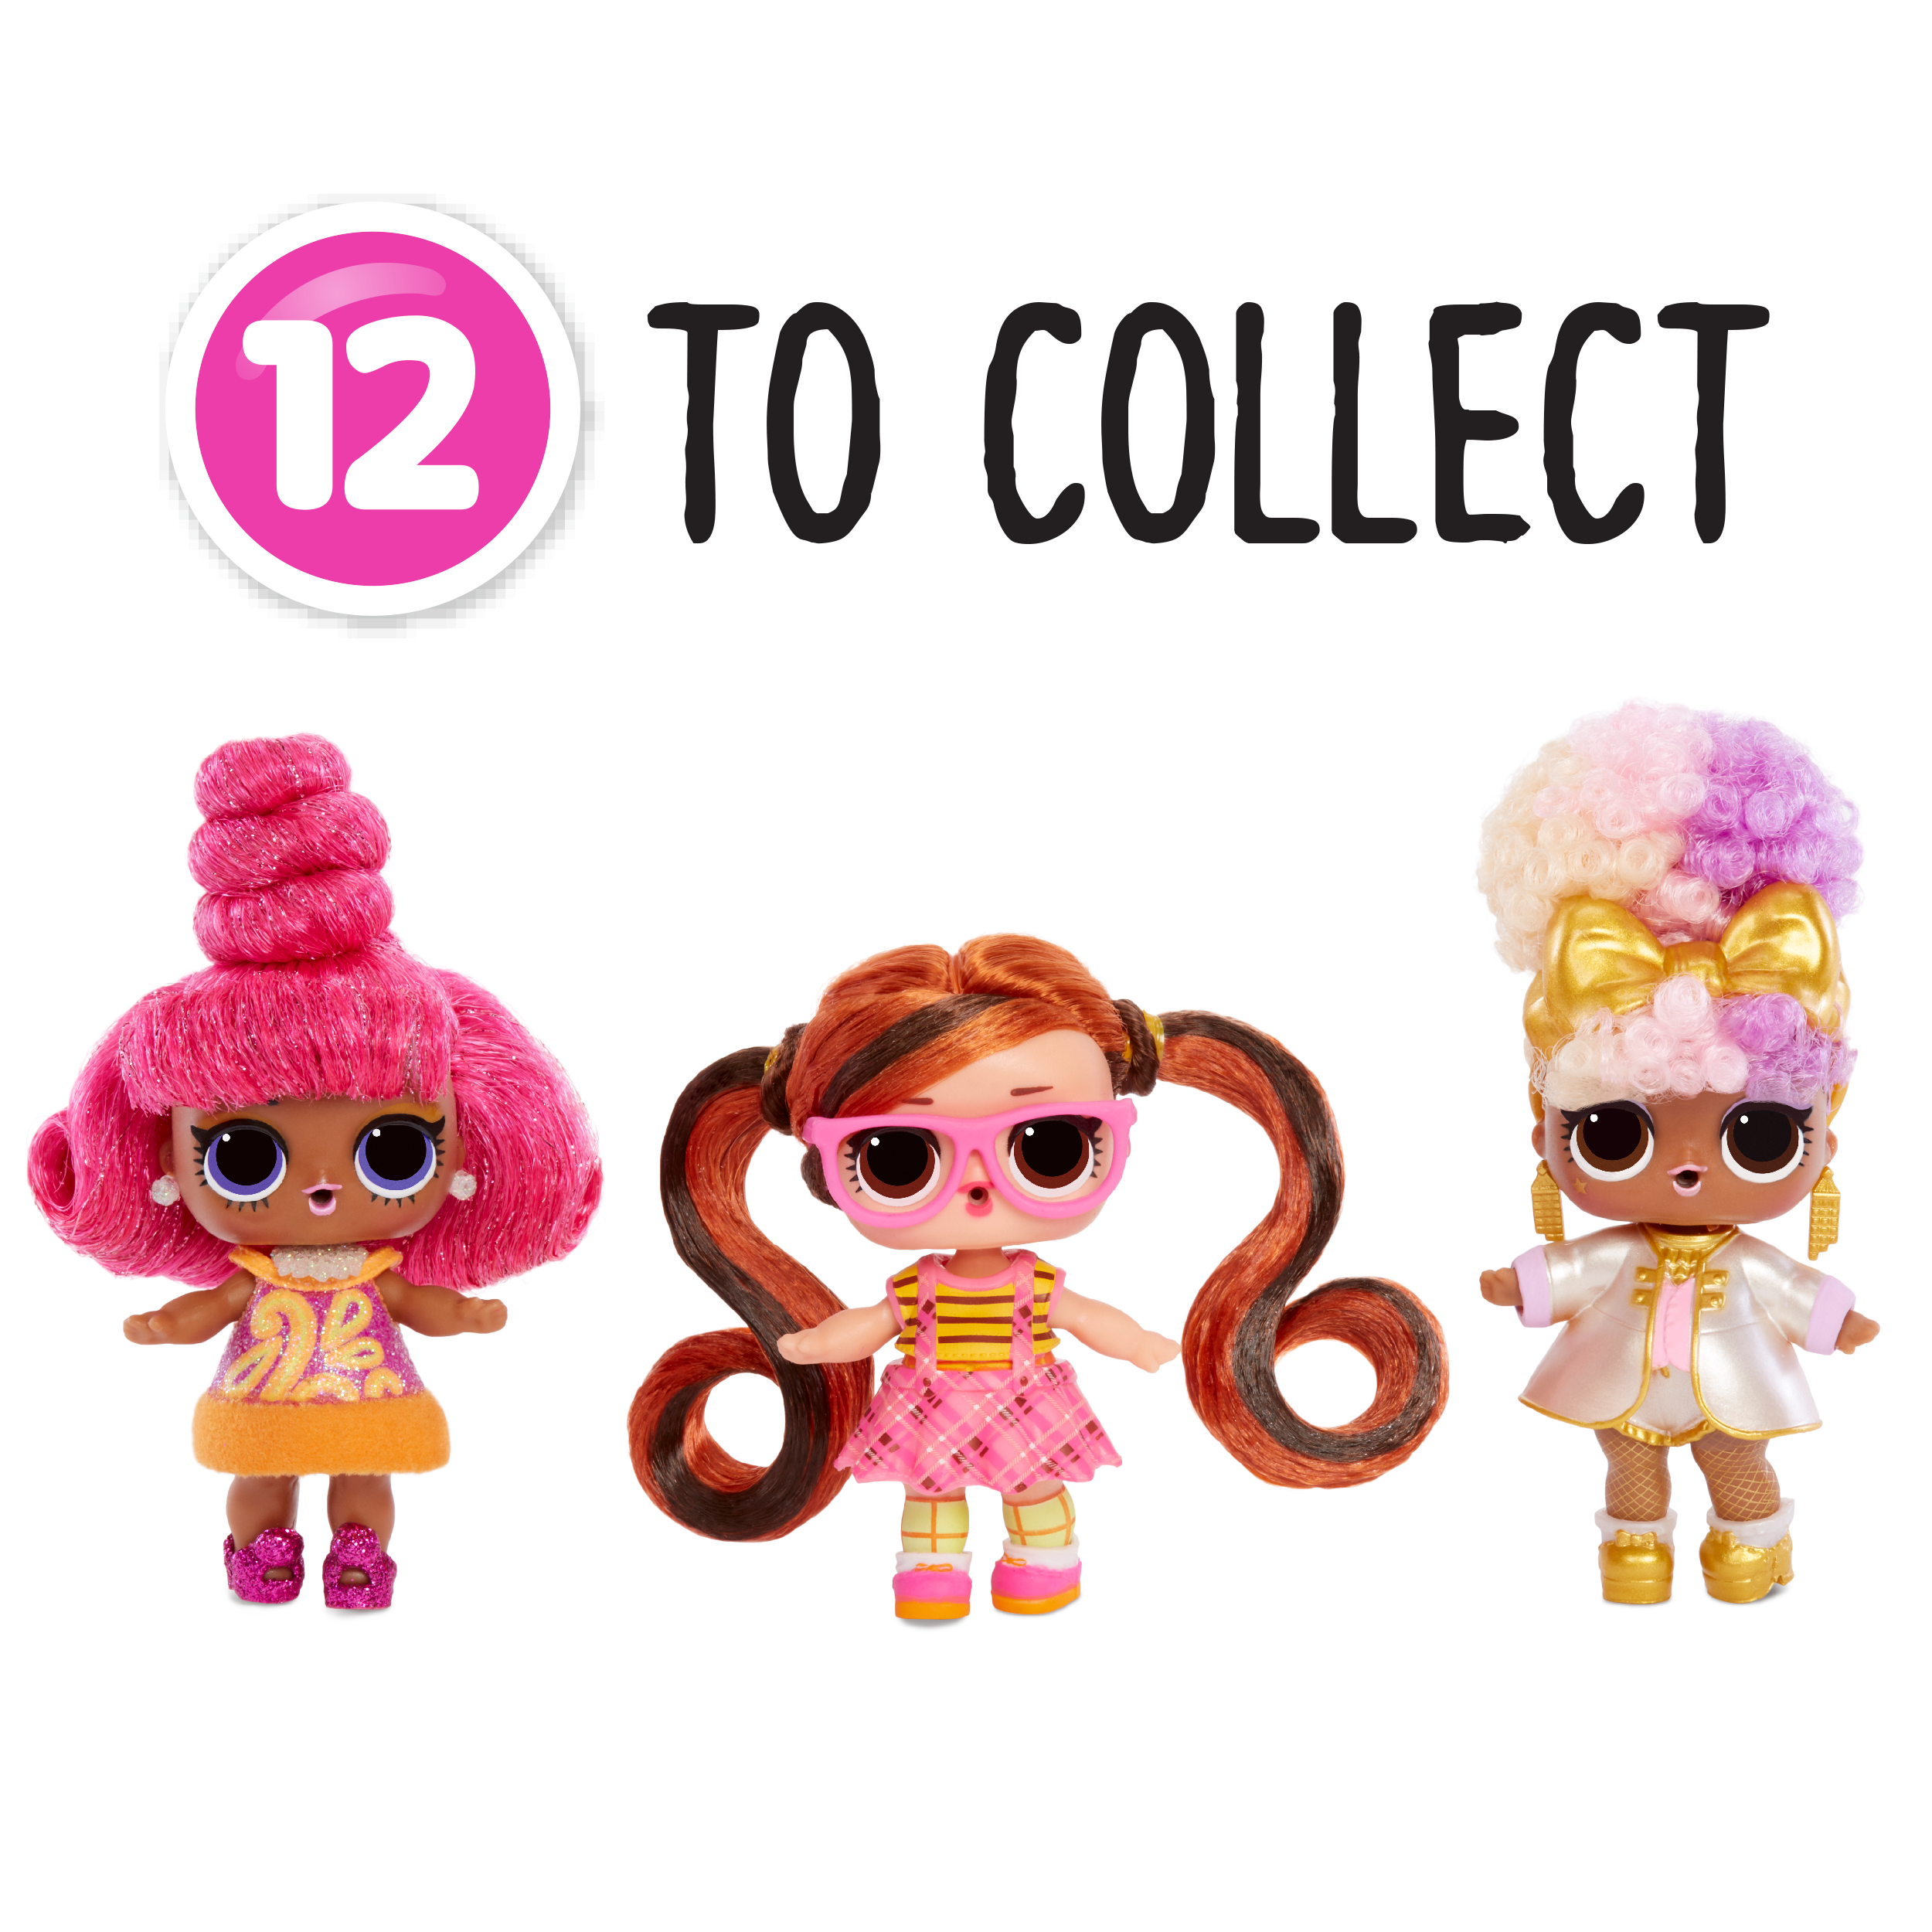 LOL Surprise Hairvibes Dolls With 15 Surprises Including Exclusive Doll, Fashion Outfits, Shoes, Accessories, Wigs, And More - For Kids Ages 6-8 - image 4 of 8